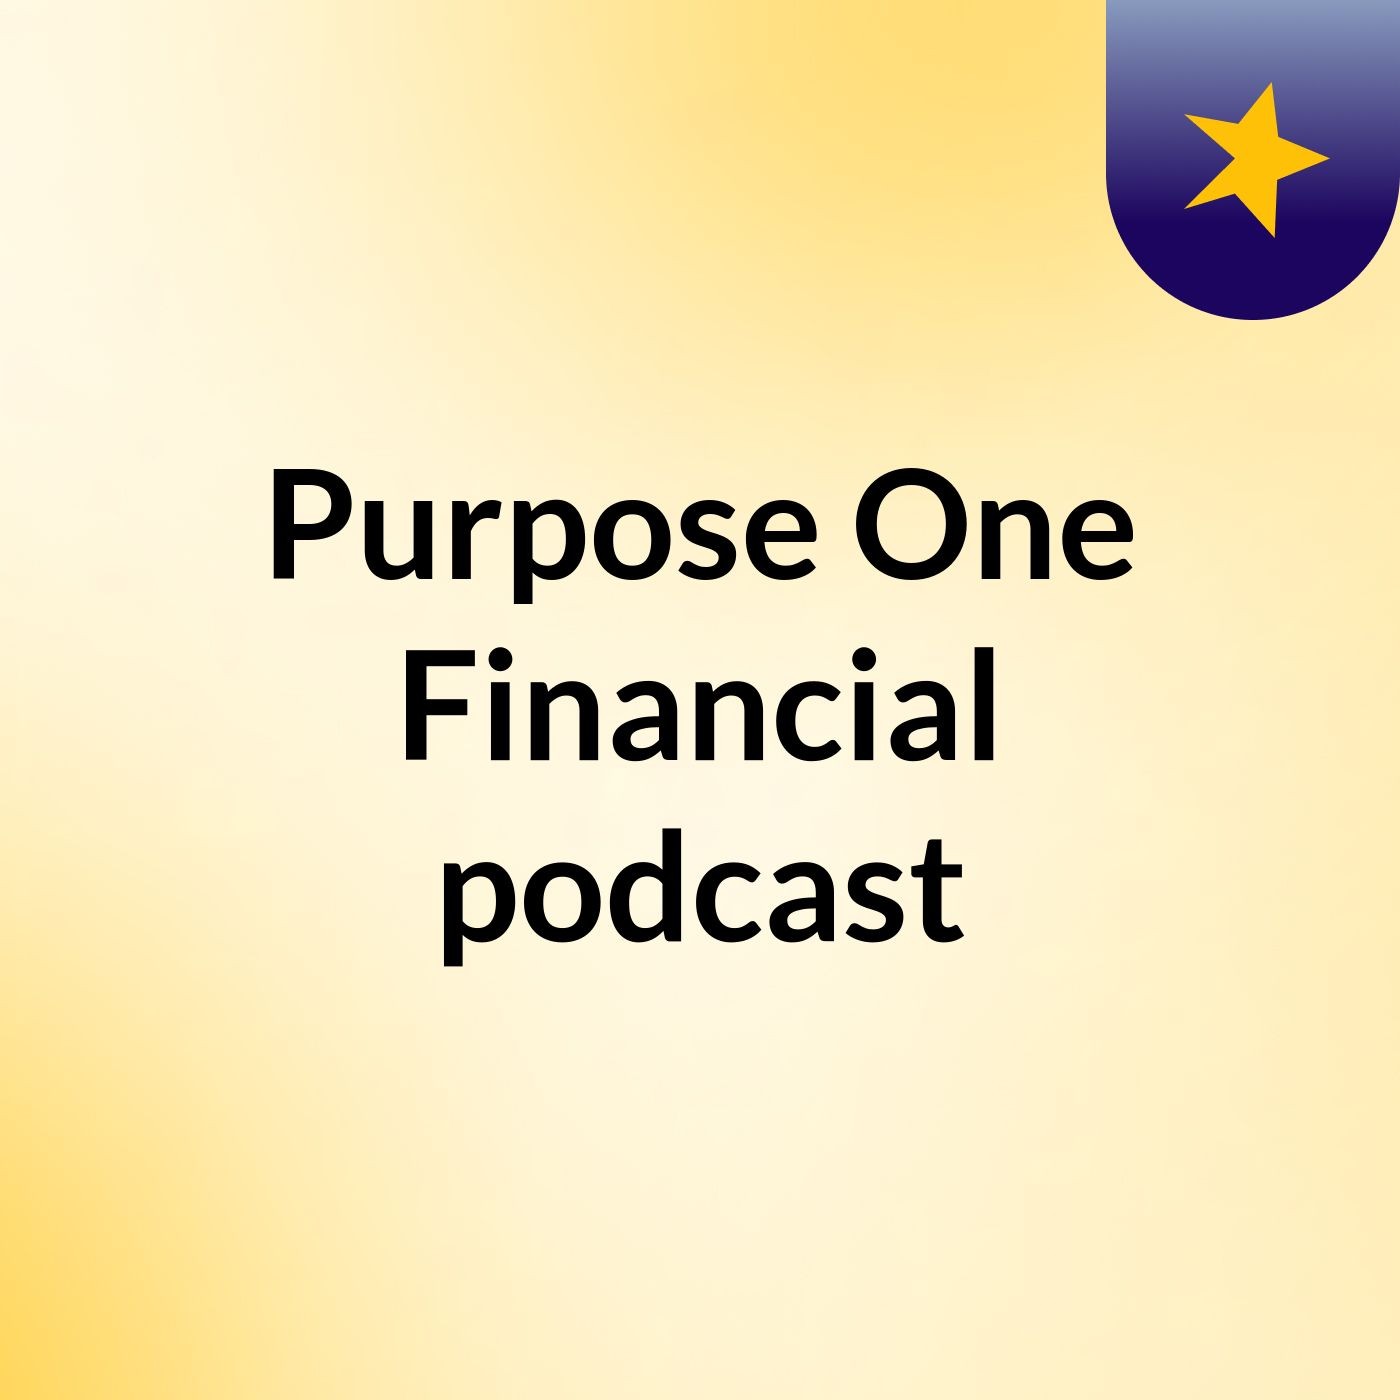 Purpose One Financial podcast